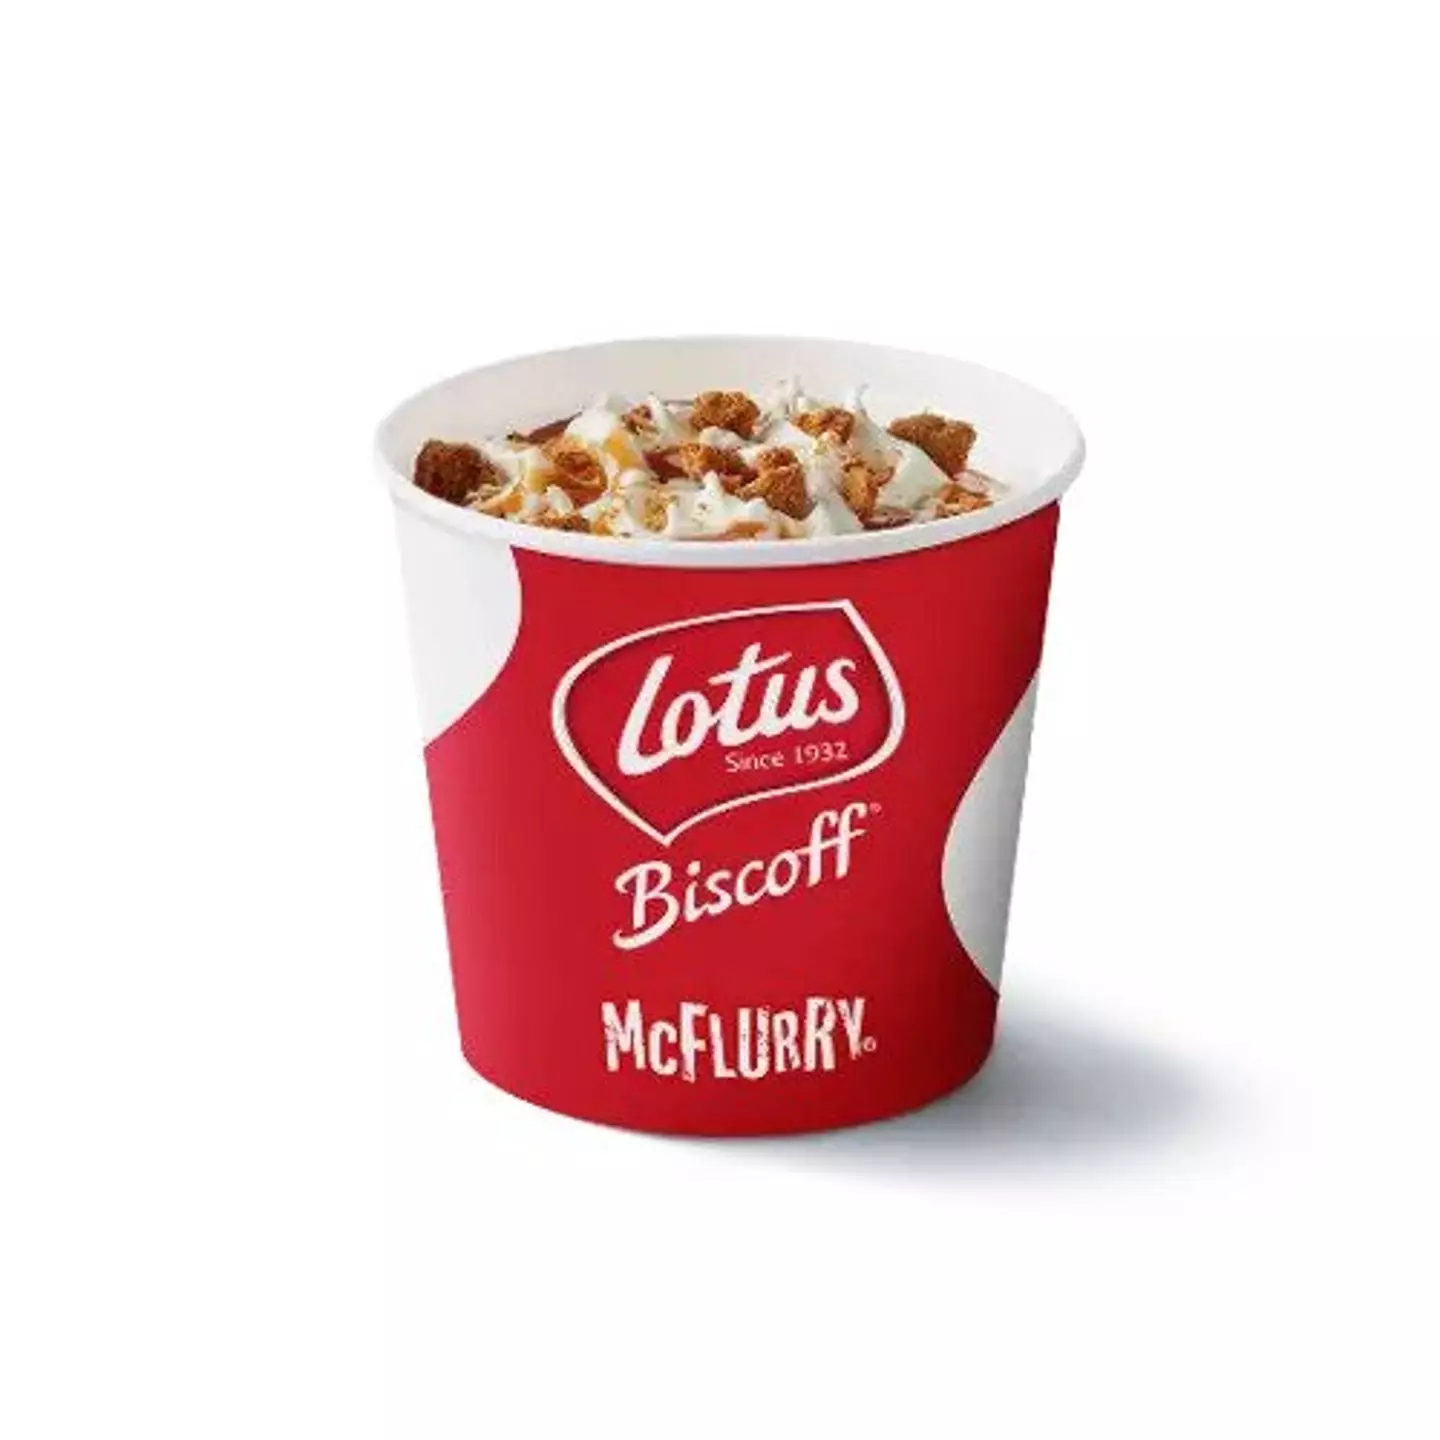 The Lotus Biscoff McFlurry is out in the UK now!